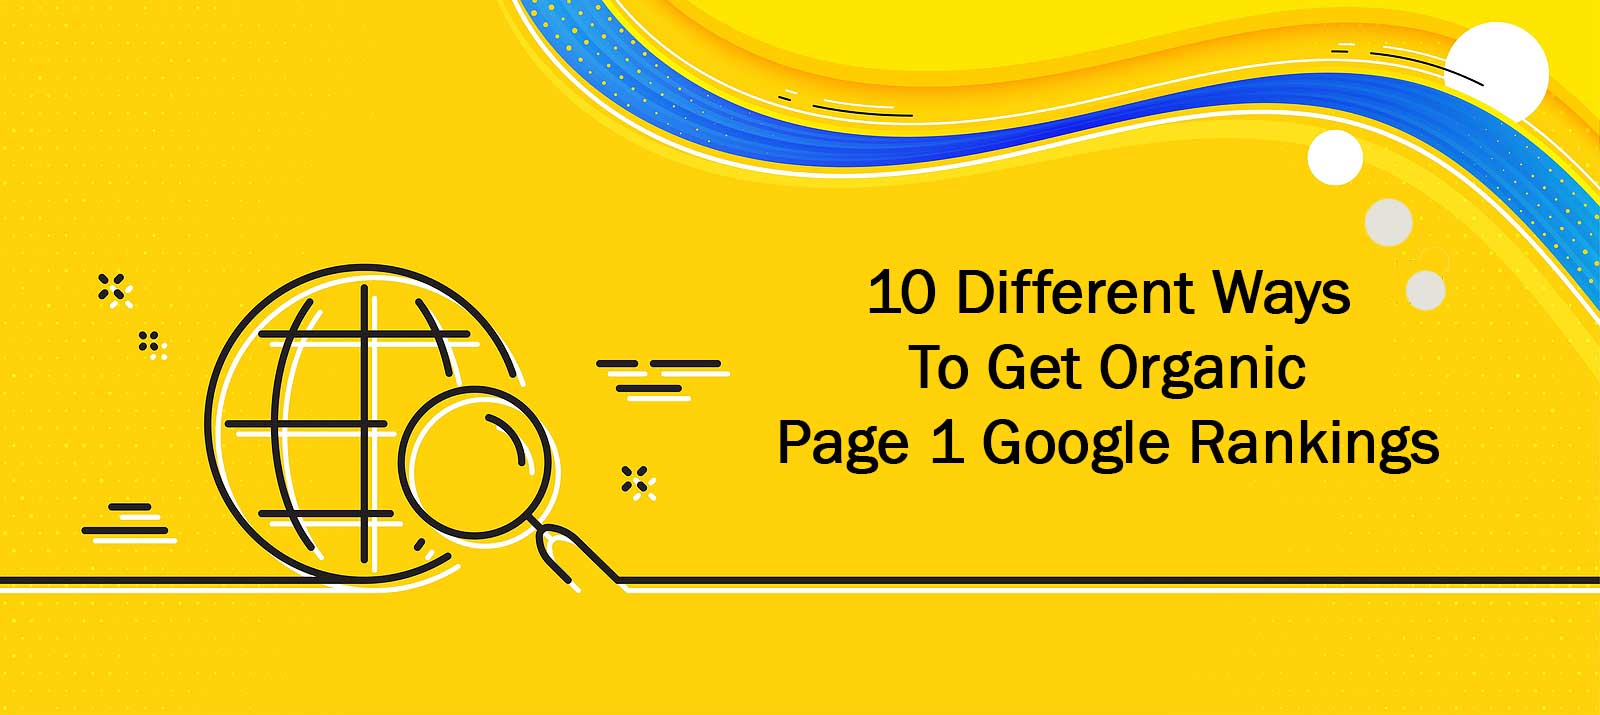 10 Different Ways To Get Organic Page 1 Google Rankings